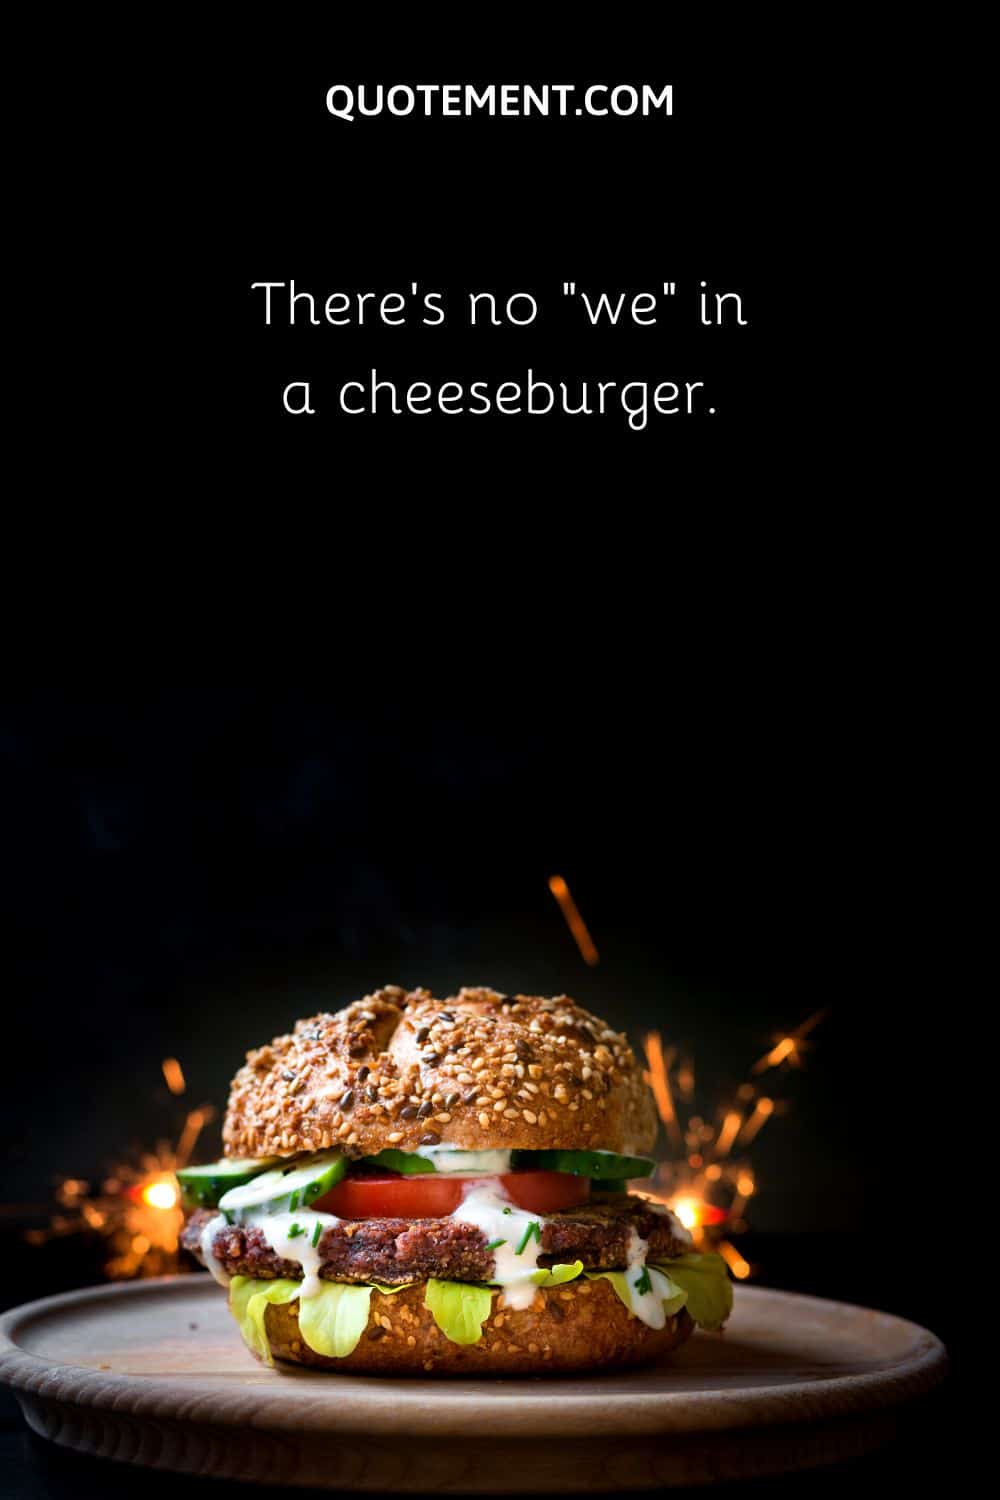 There’s no “we” in a cheeseburger.